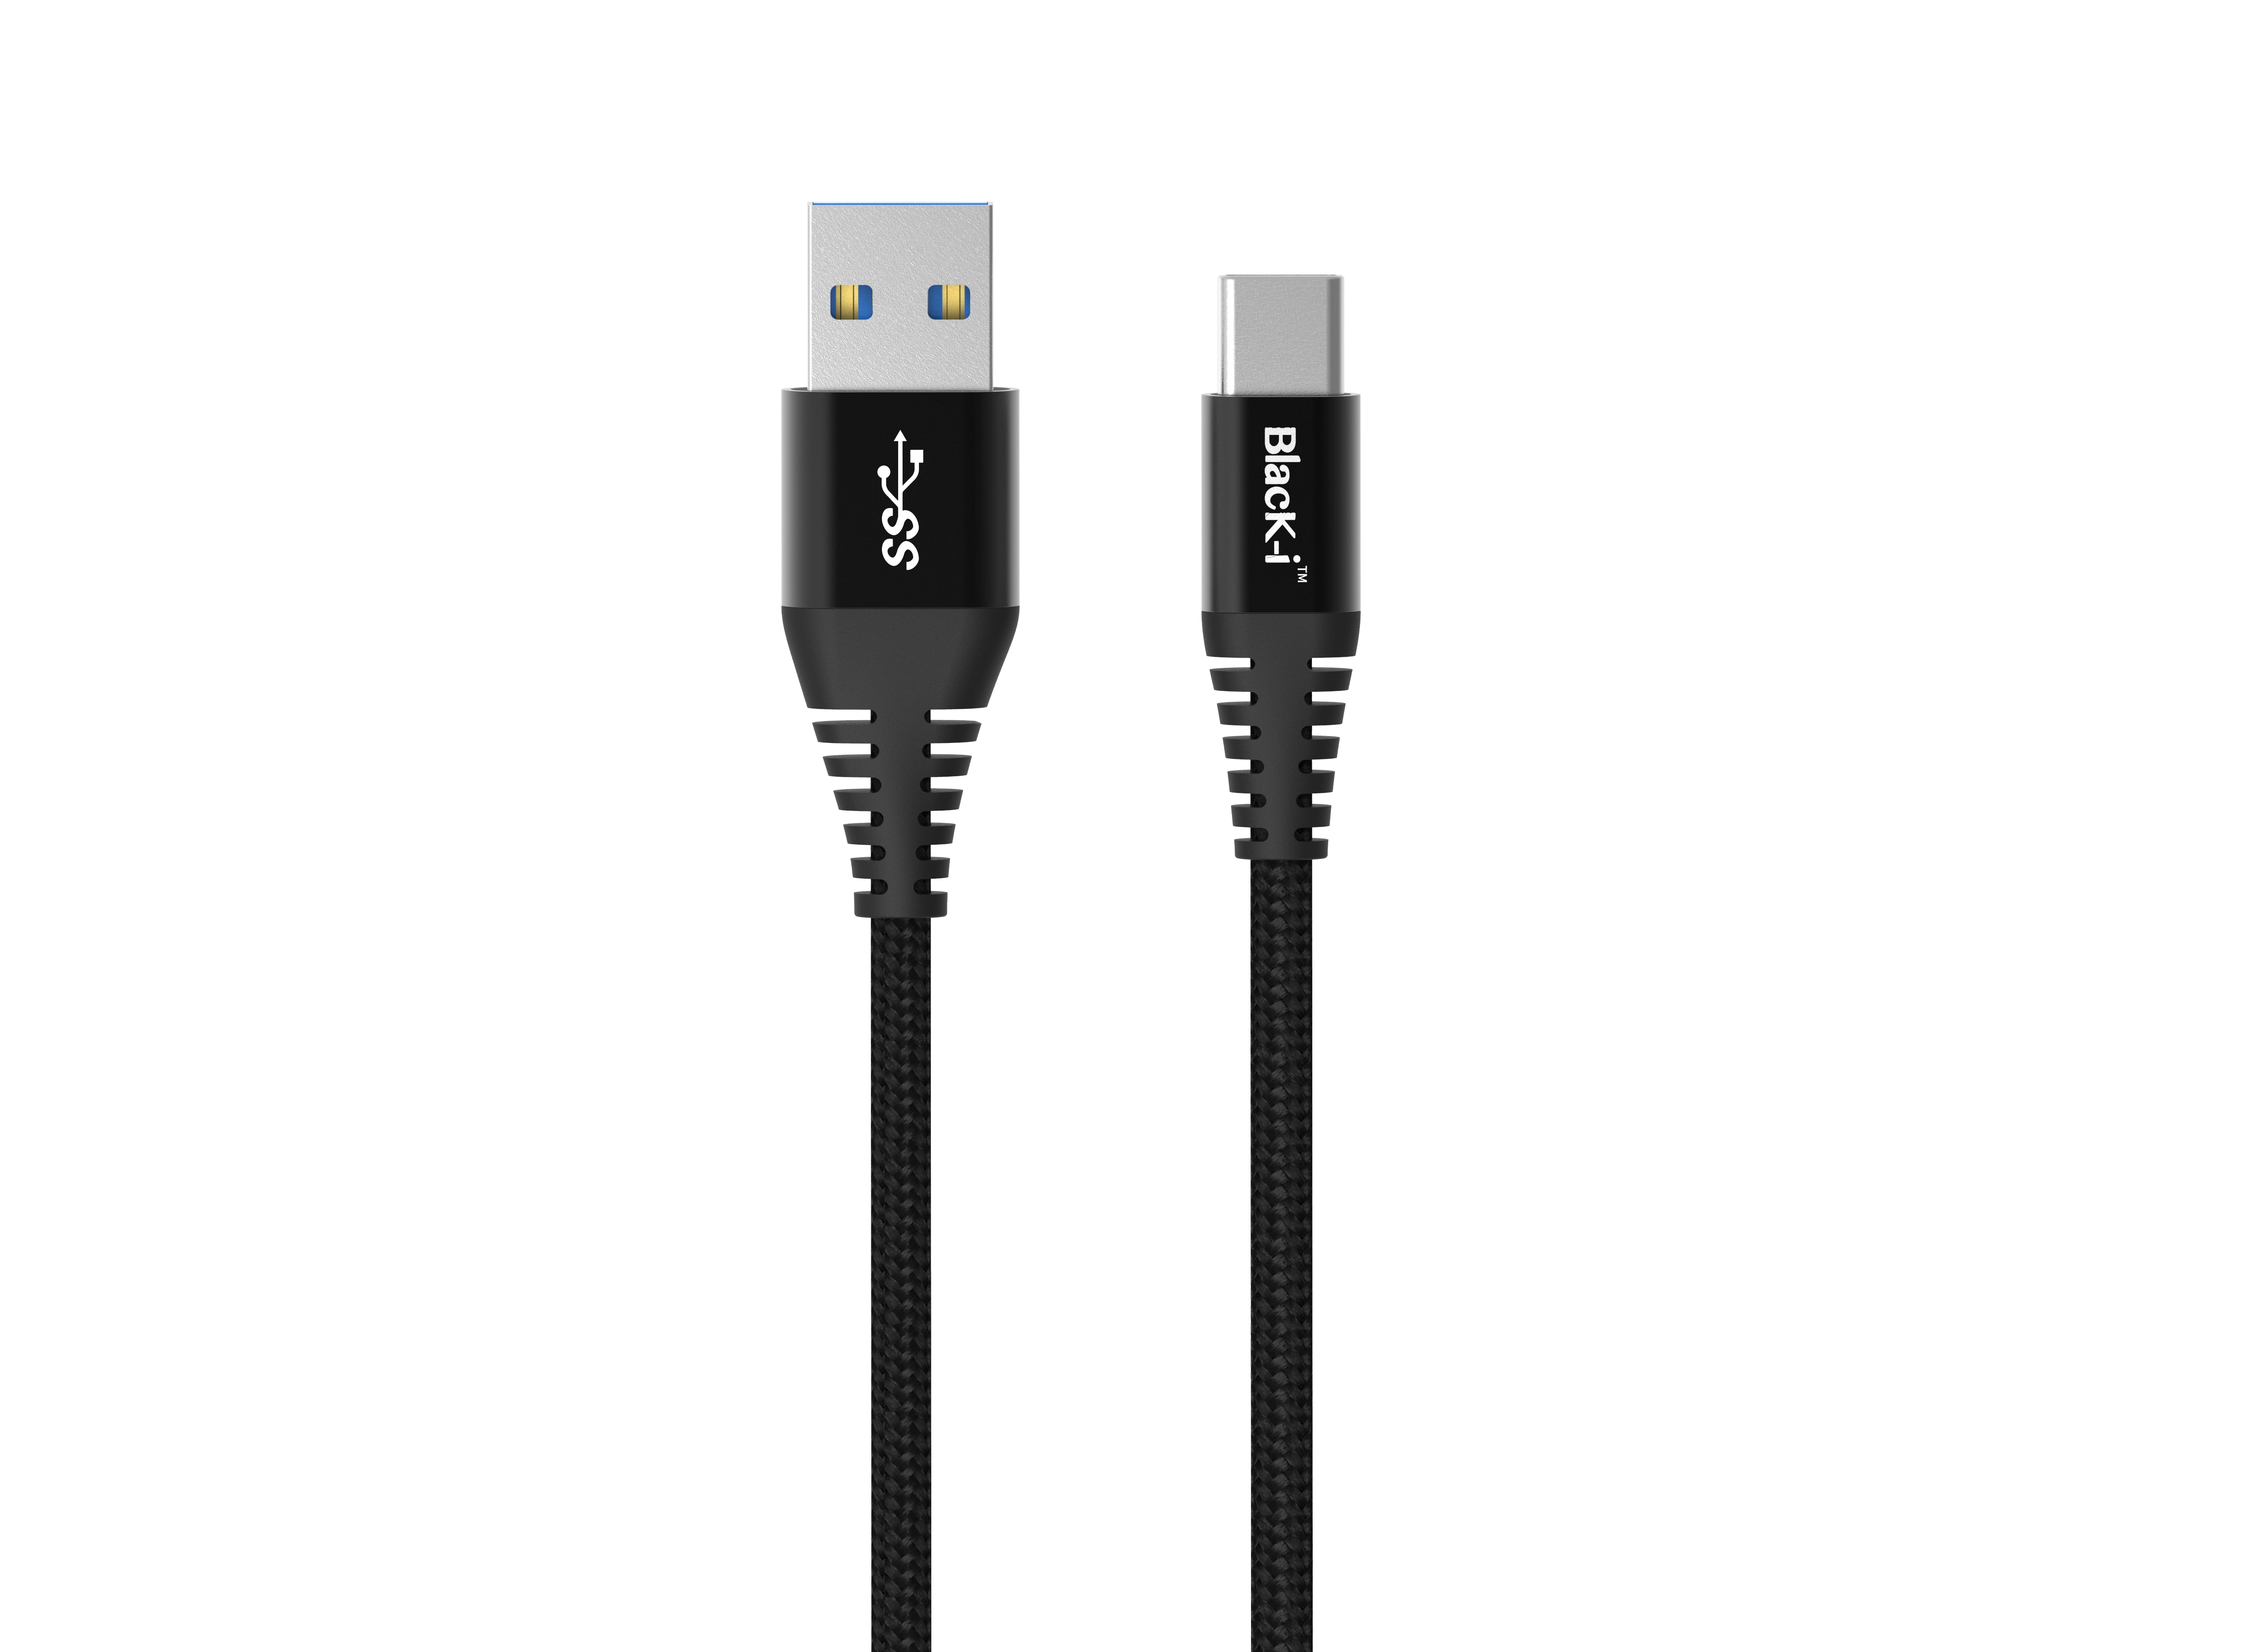 Black-i USB 3.0 to USB-C Cable - 2 Meter Length – Swift Data Transfer and Charging in a Convenient, Extended Design